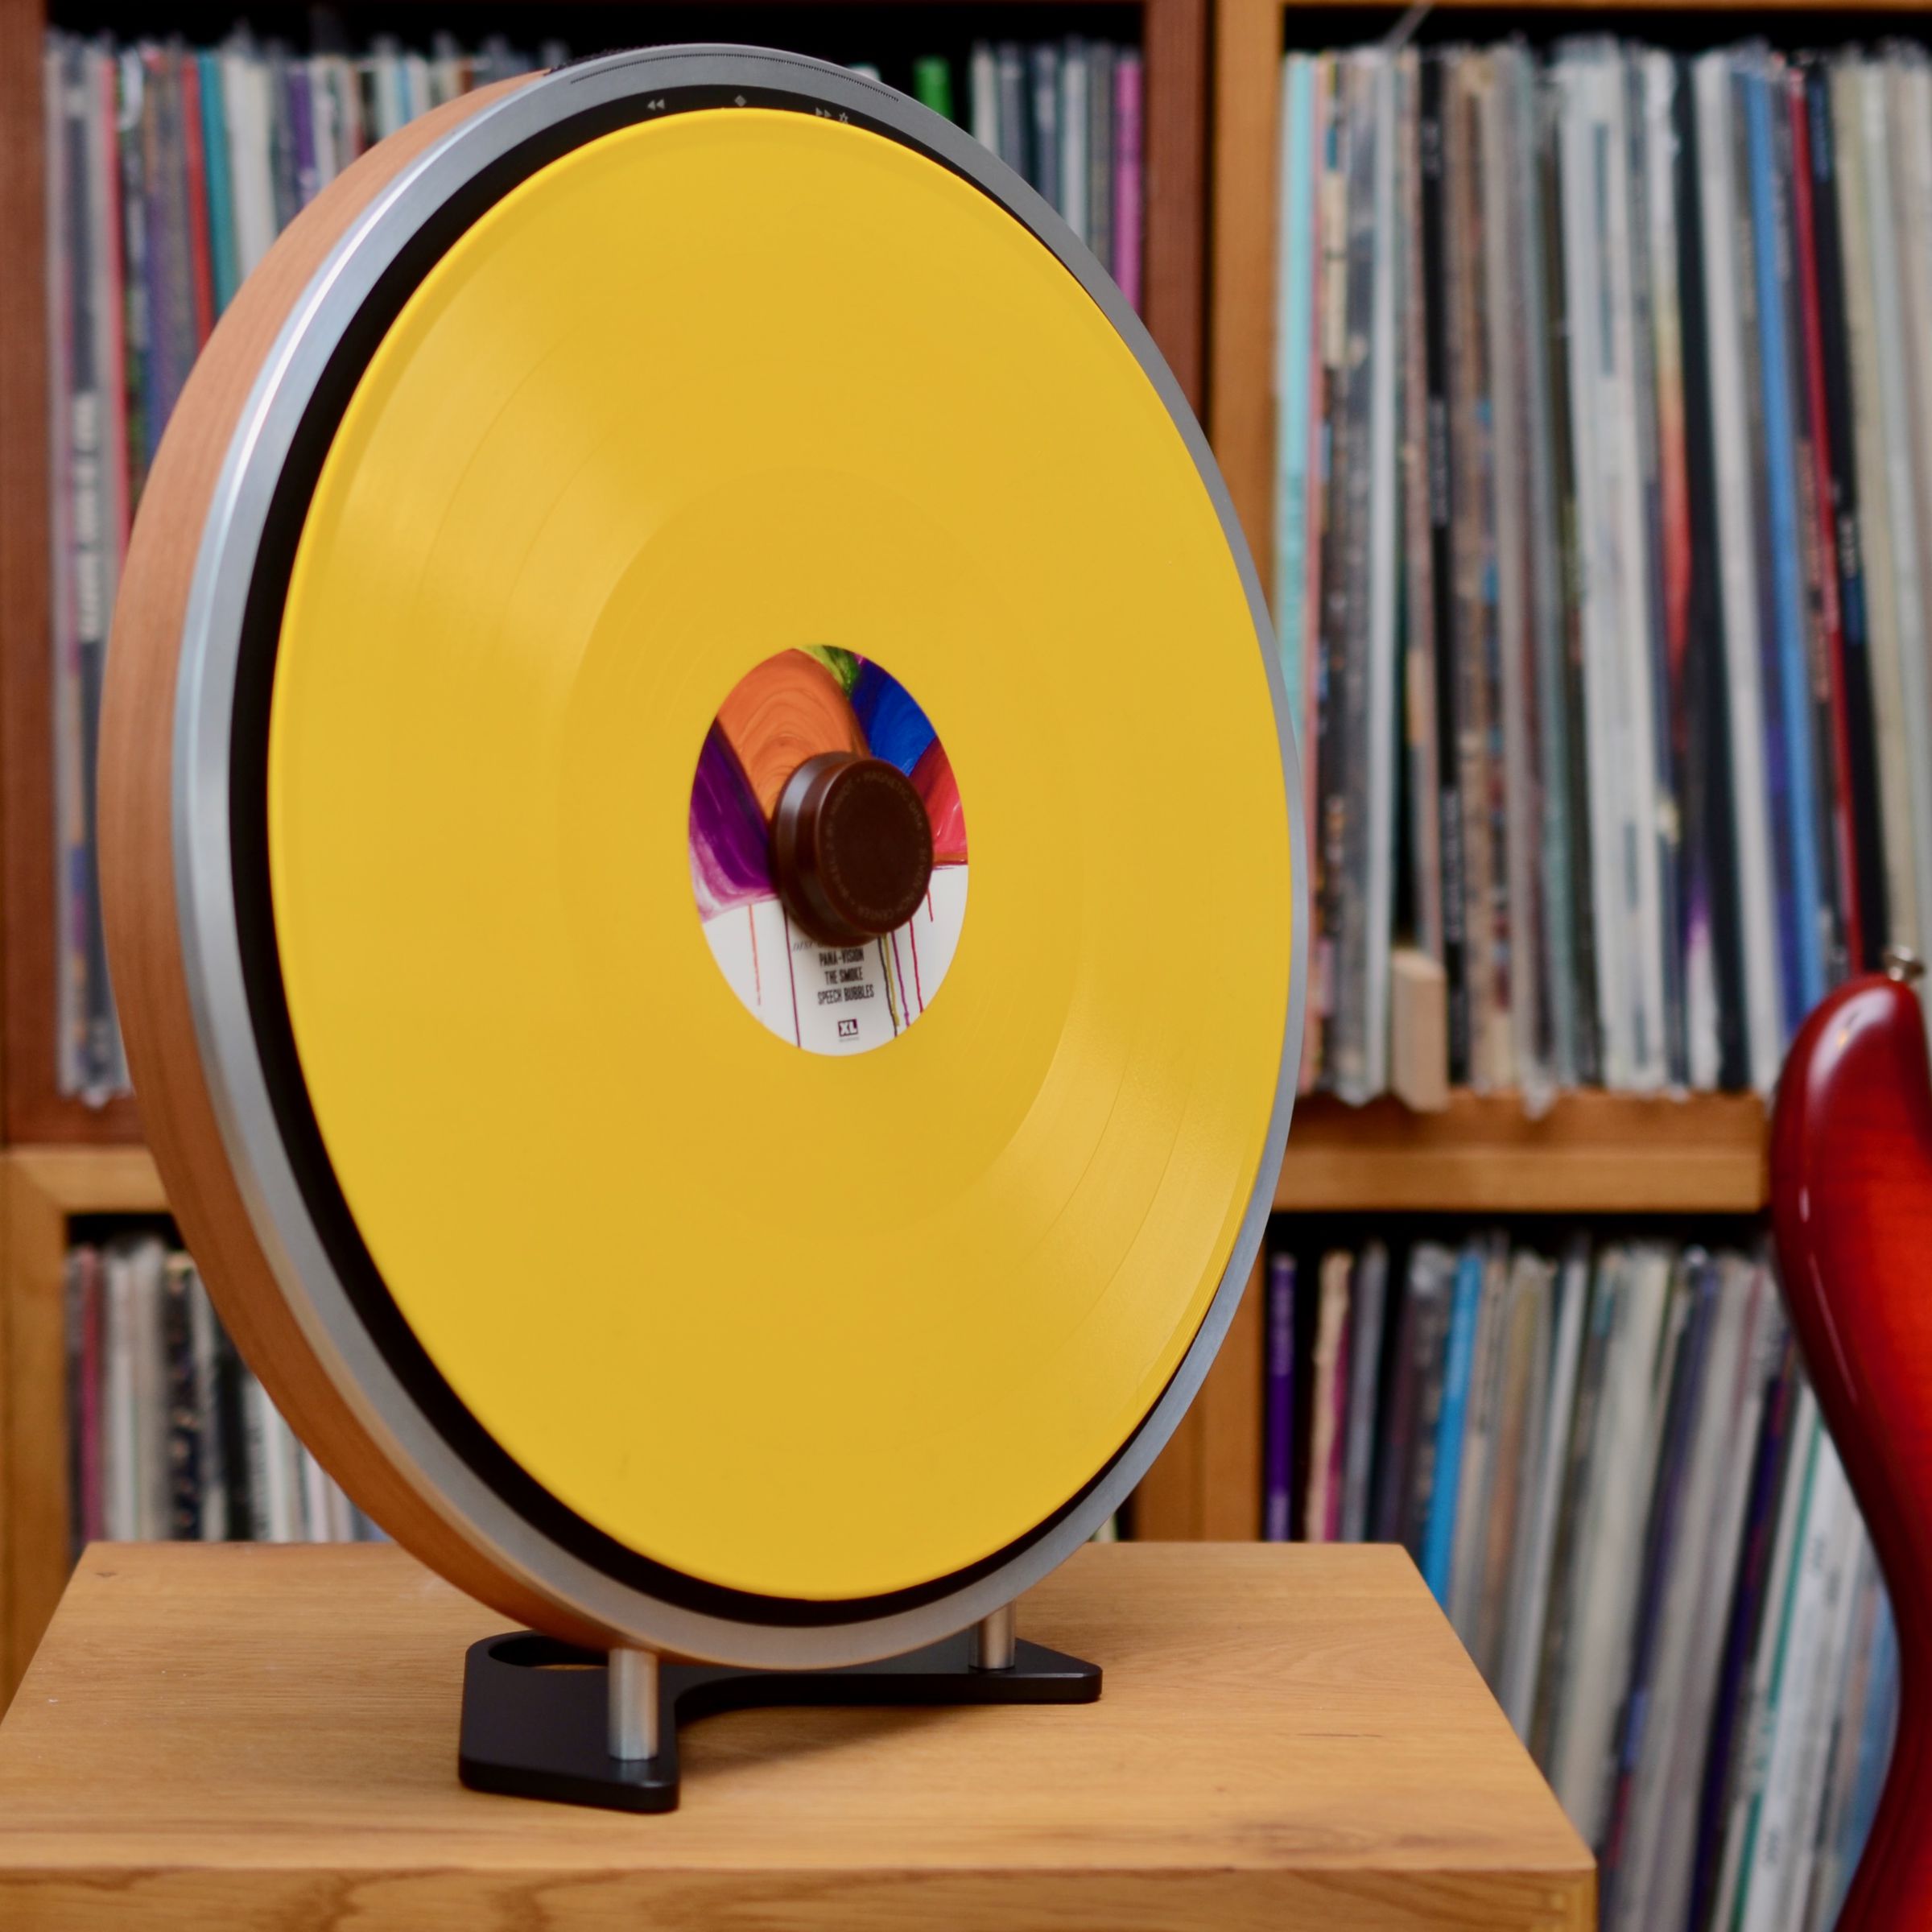 The Miniot Wheel 2 turntable stands upright with a bright yellow record installed. Behind it is a wall of albums inserted into boxes with a red guitar leaning against it.